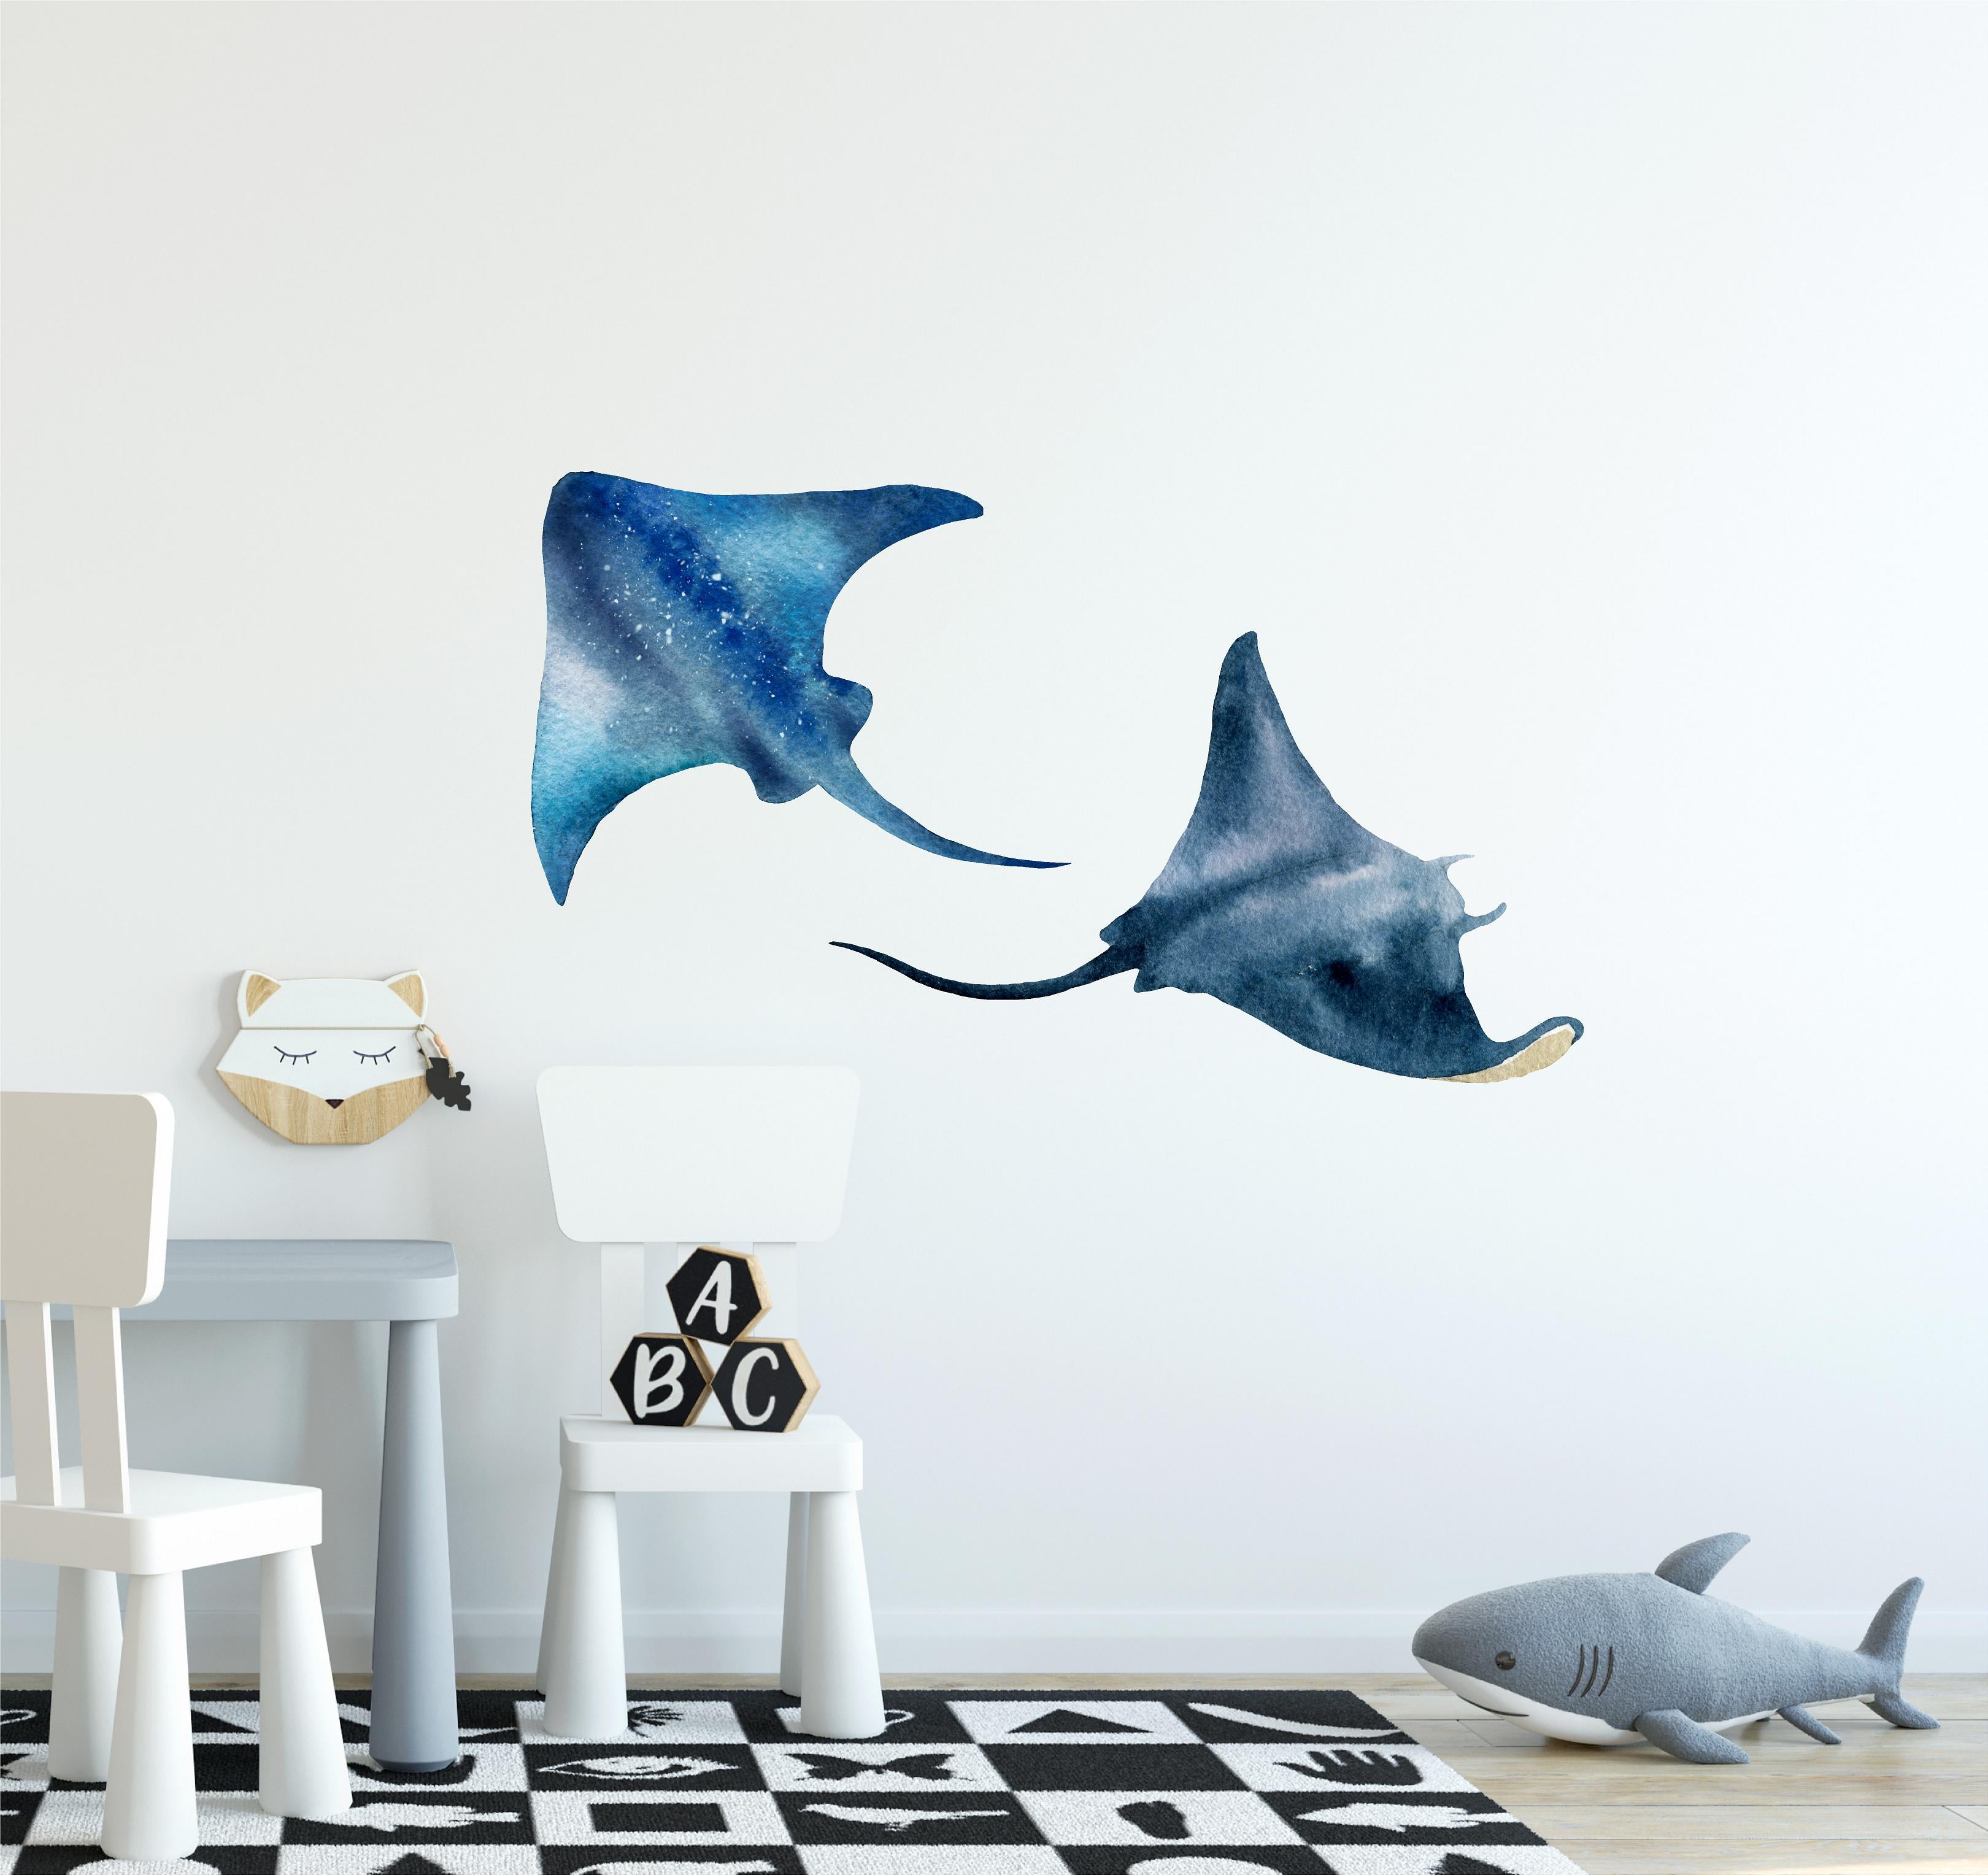 Watercolor Navy Blue Stingrays Wall Decal Set of 2 Sea Ocean Stingray Wall Sticker | DecalBaby